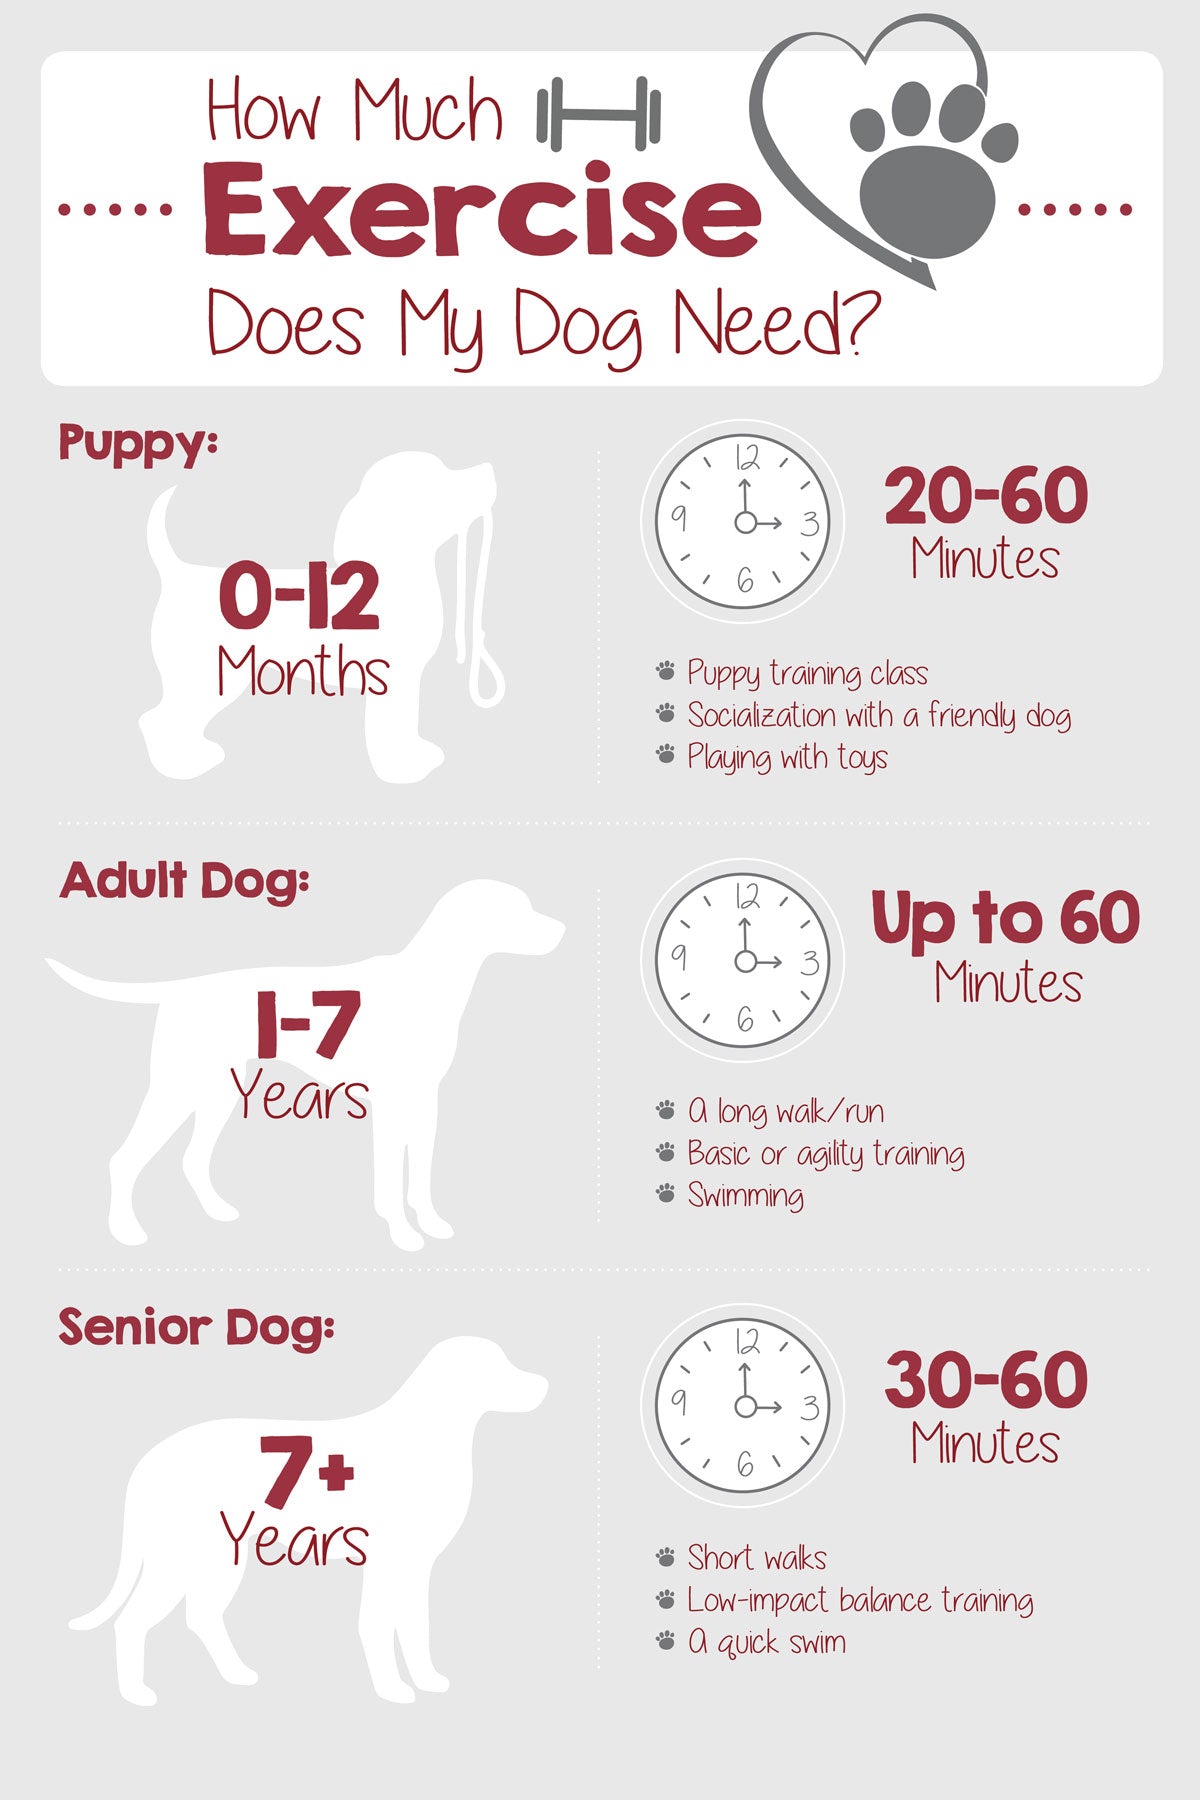 Dog exercise infographic